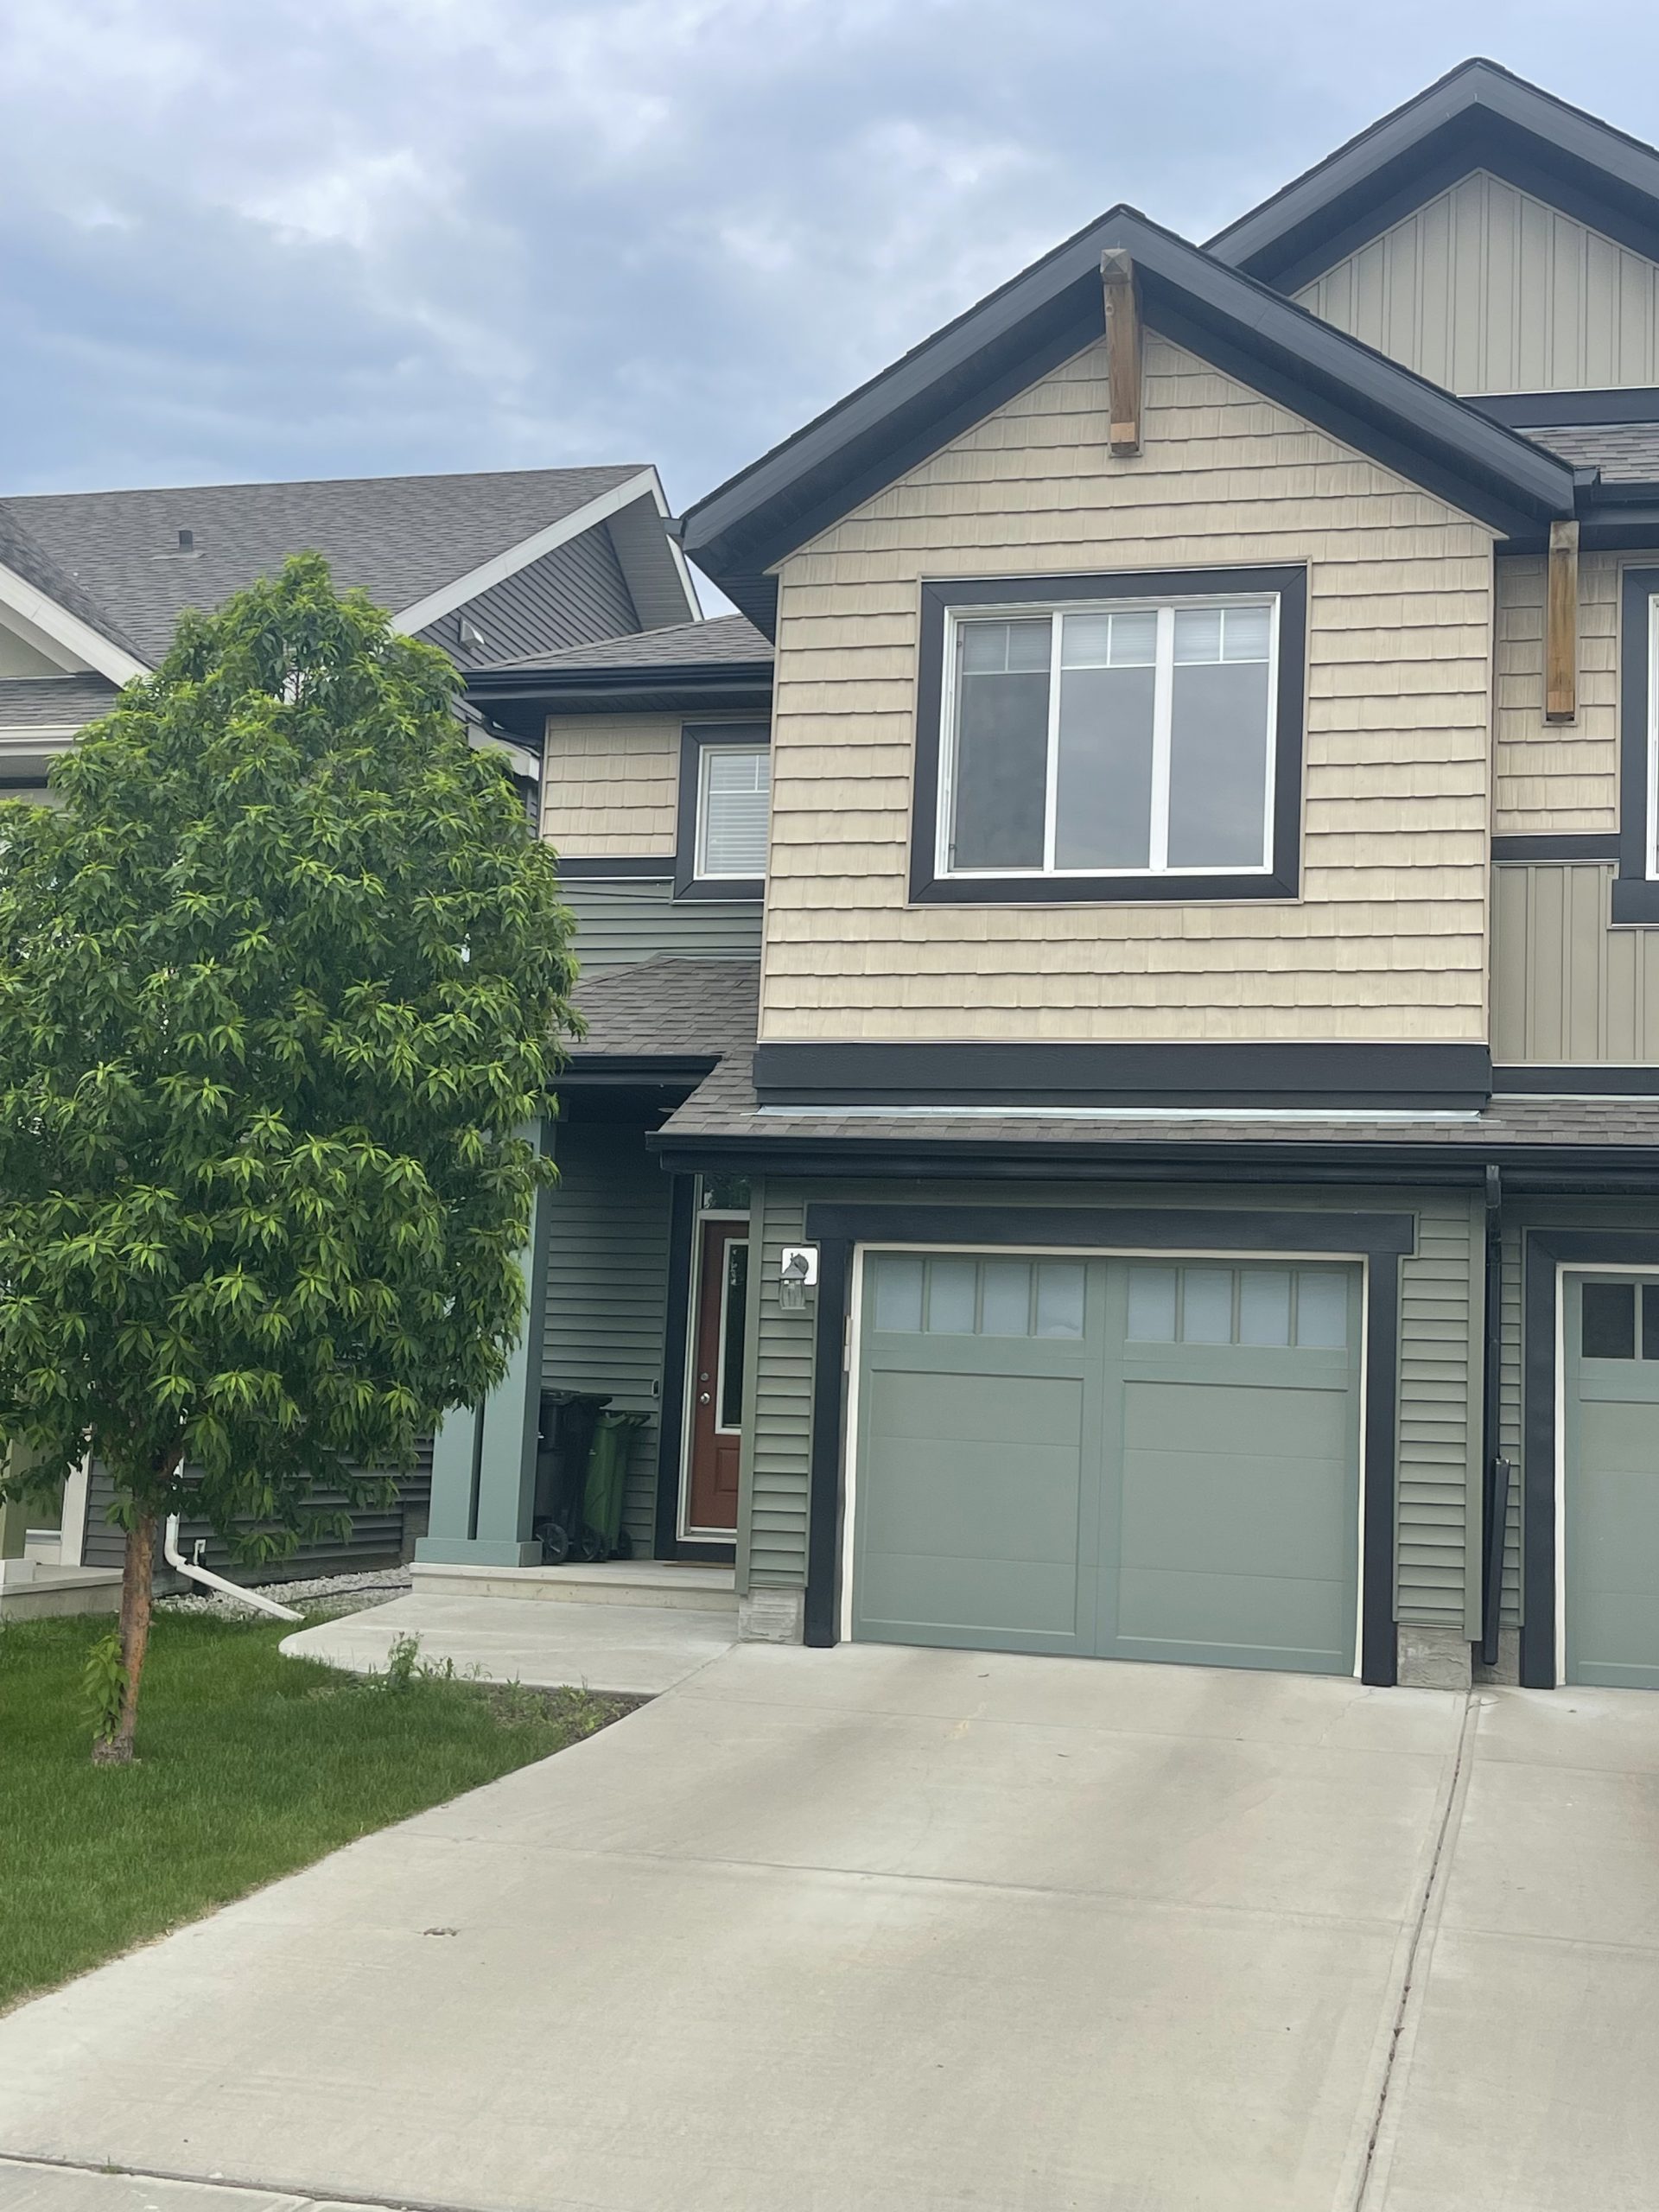 Stunning 1/2 duplex located in the Community of The Orchards at Ellerslie. $1875/month